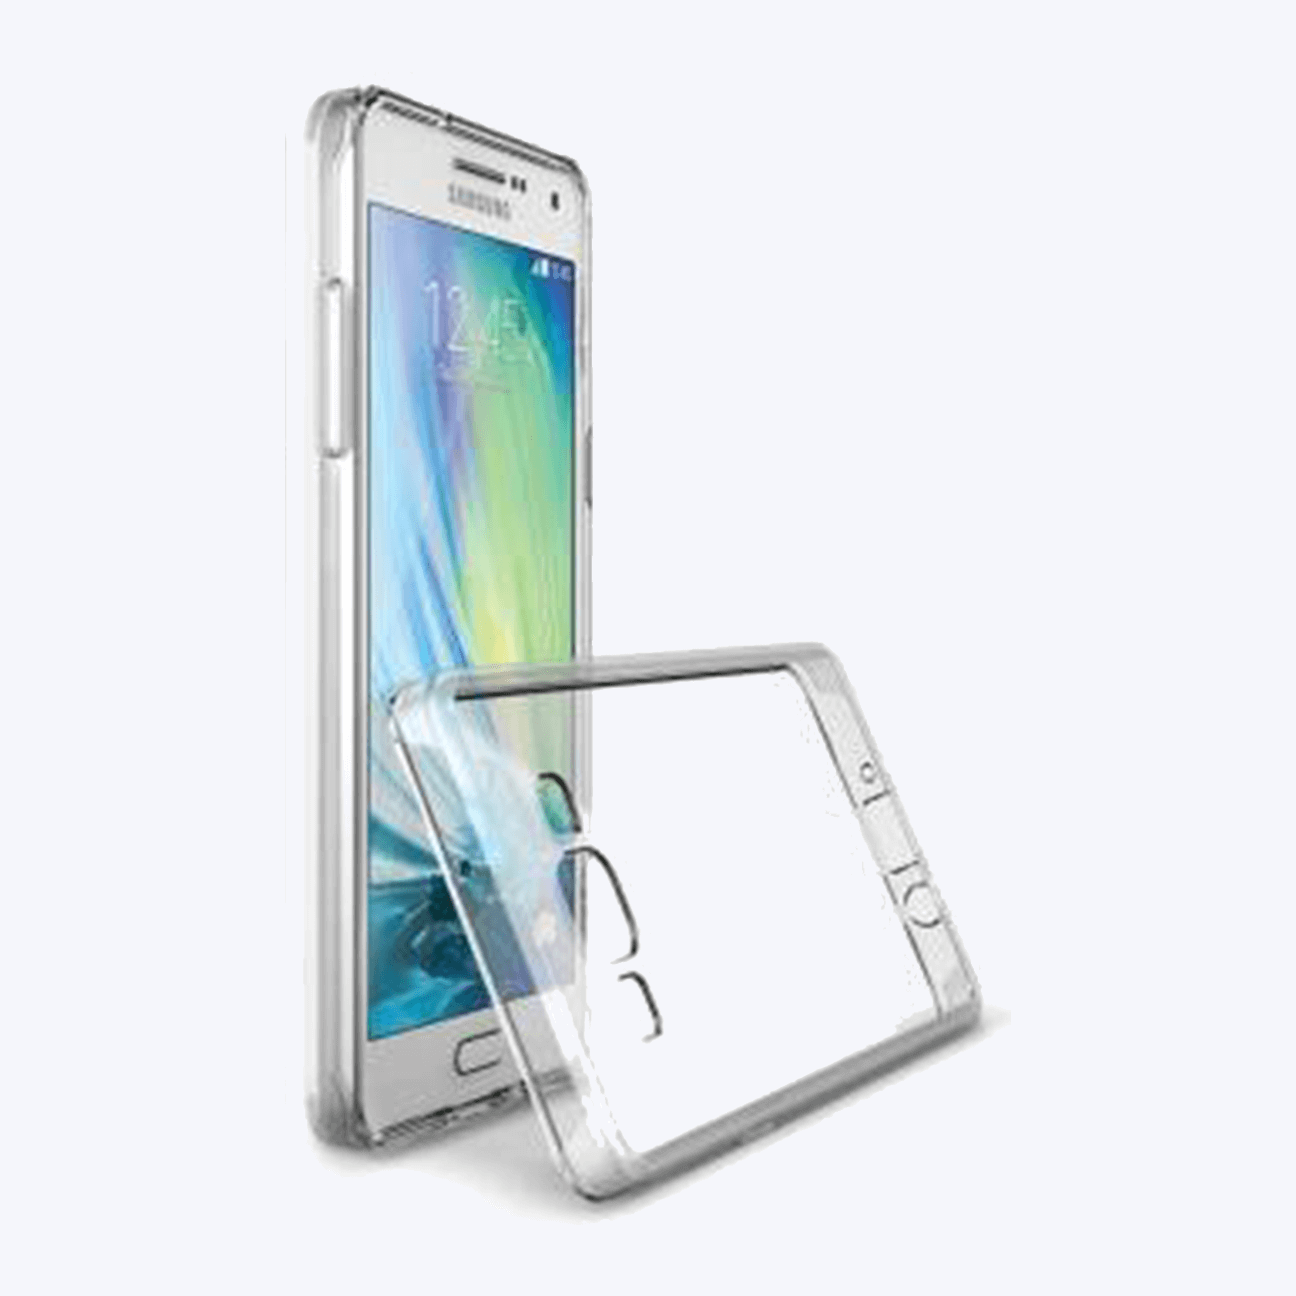 Samsung Galaxy J2 Ace (Old) Transparent Back Cover